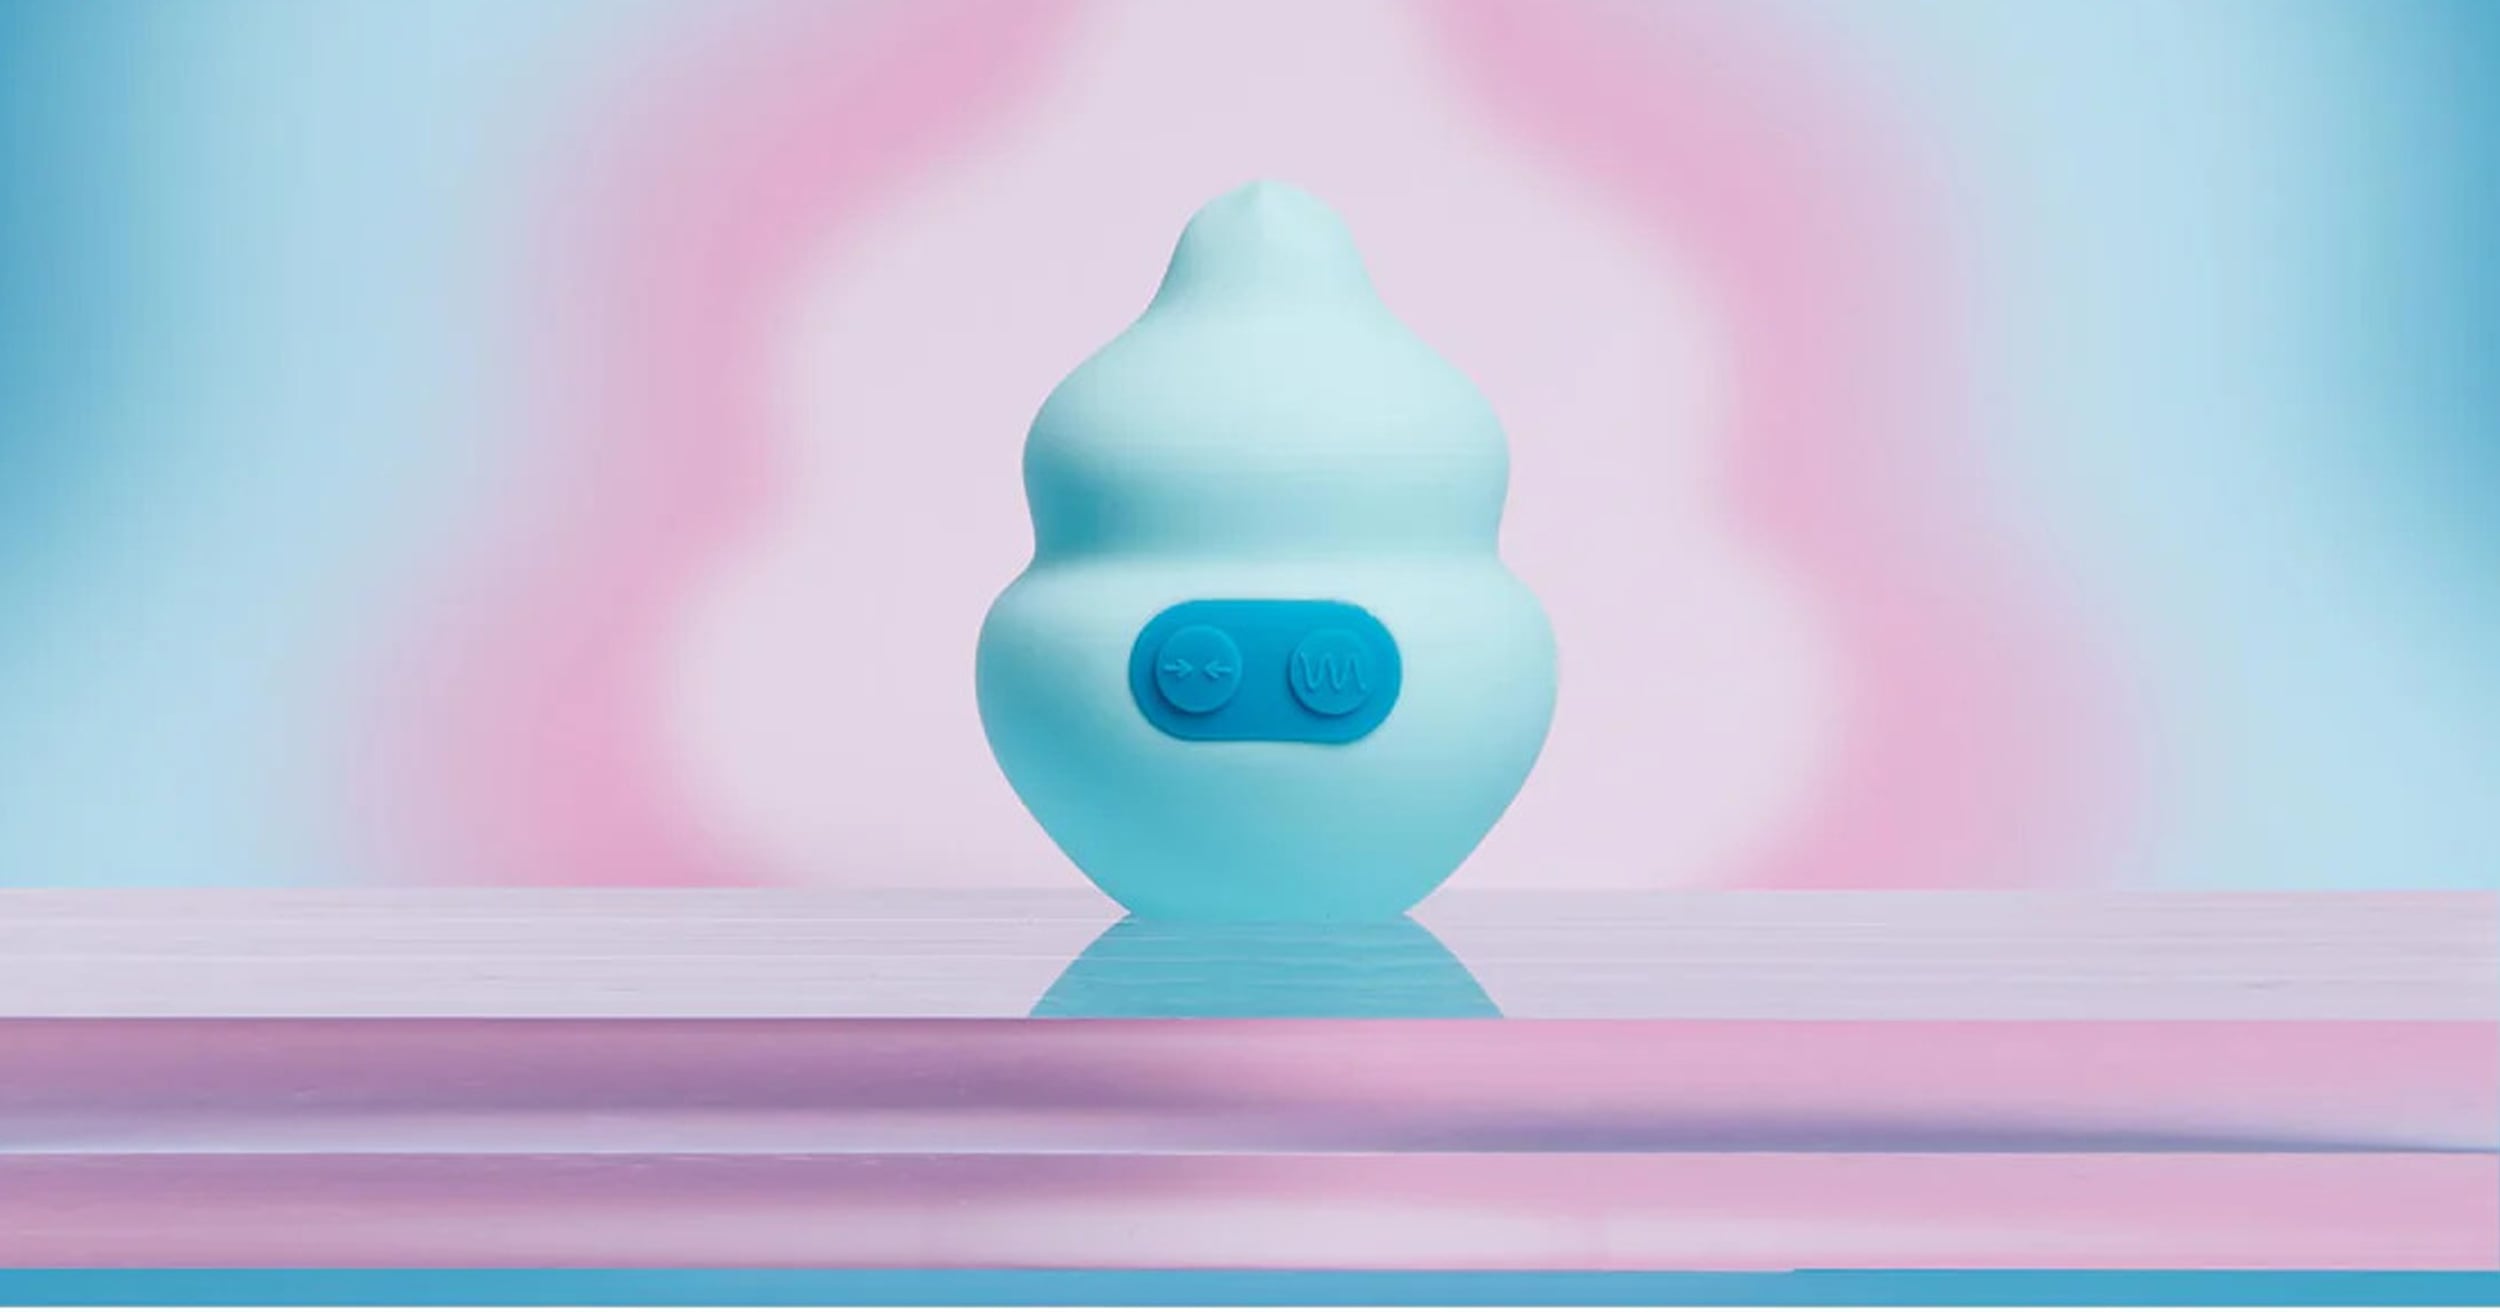 Squishy Sex Toys (Yes, Squishy) Are Trending